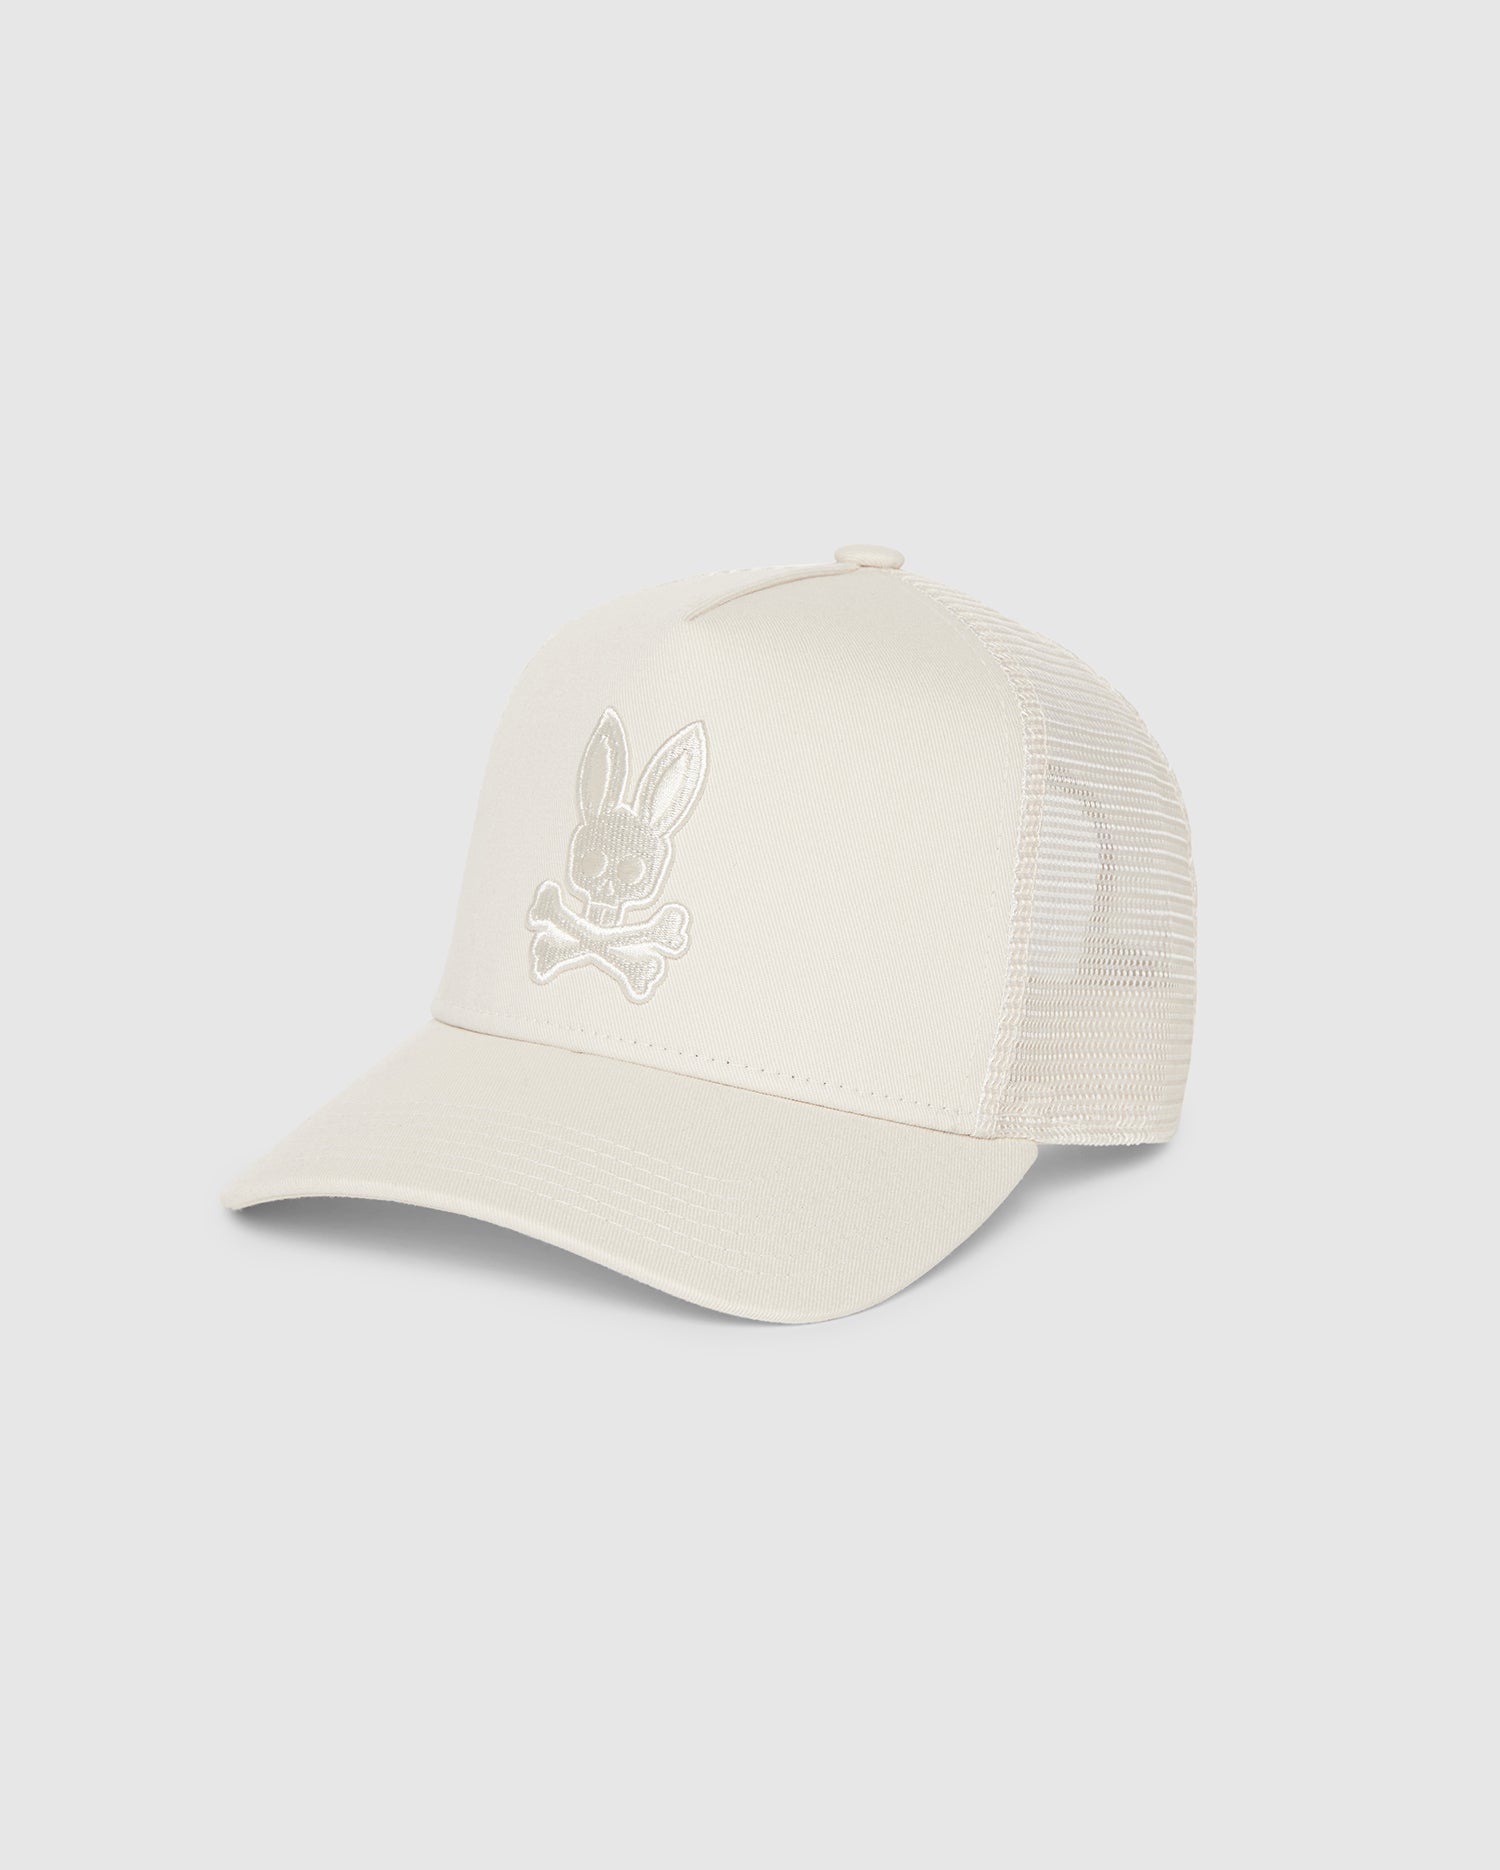 A beige men's trucker cap with a curved brim and mesh back. The front features a tonally embroidered Bunny design above two crossed bones, all in a similar beige color, providing a subtle yet distinctive look. It also includes snapback fastening for an adjustable fit. The Psycho Bunny MENS JAY TRUCKER CAP - B6A123B2HT is perfect for adding style to any casual outfit.